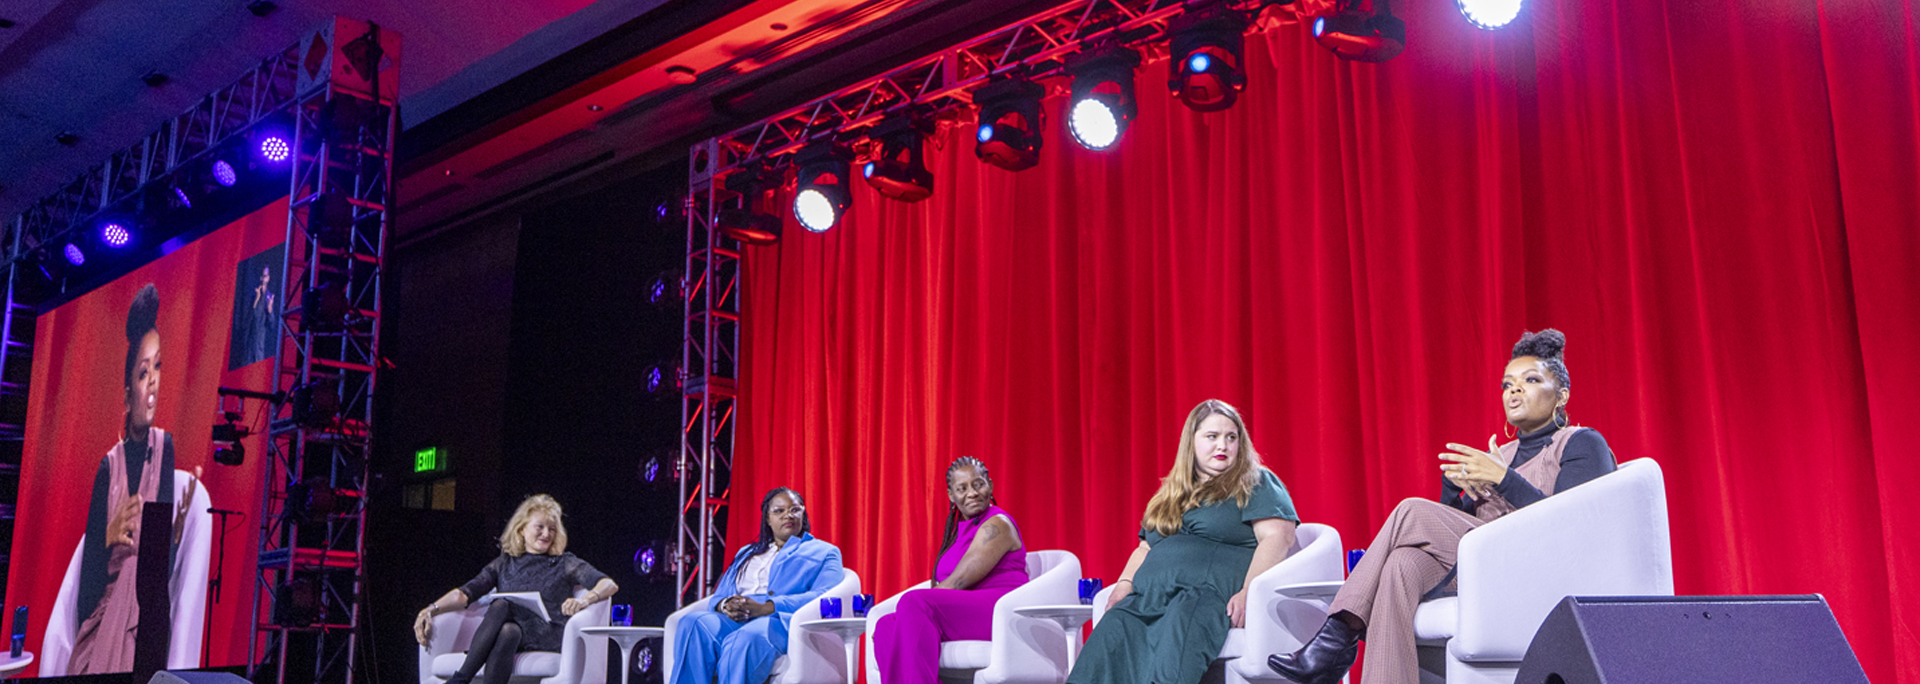 Krista Tippett, Caring Across staff member Aisha Adkins, Bonnie Okoth of National Domestic Workers Alliance, Maria Town of American Association of People with Disabilities, and Yvette Nicole Brown speak on a panel at CareFest.